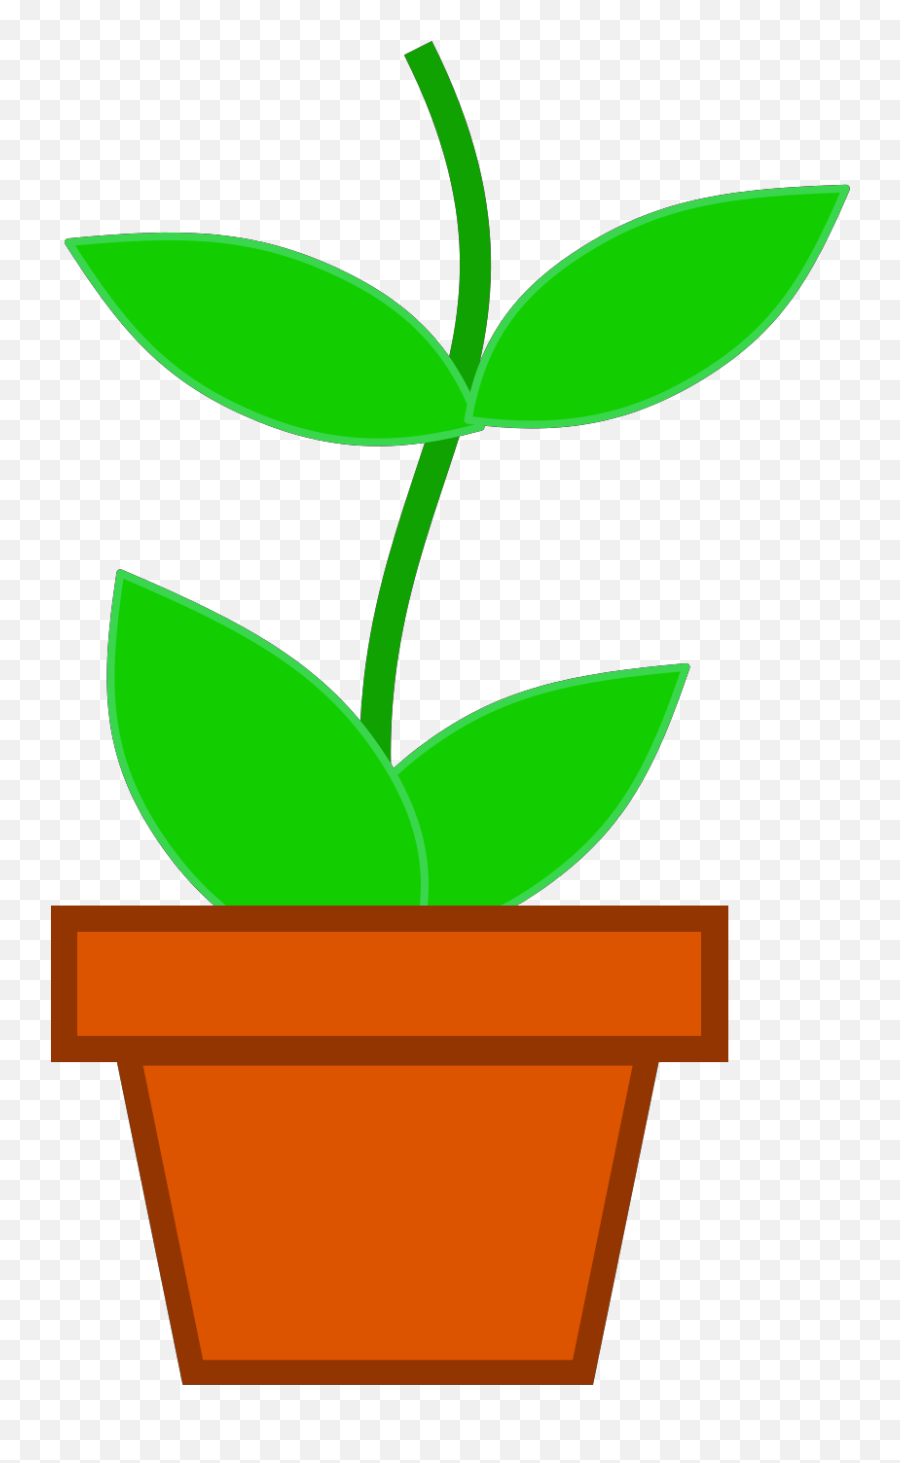 Parts Of A Plant Clipart Free Images 6 - Clipartingcom Pot Plant Clip Art Emoji,Plant Clipart